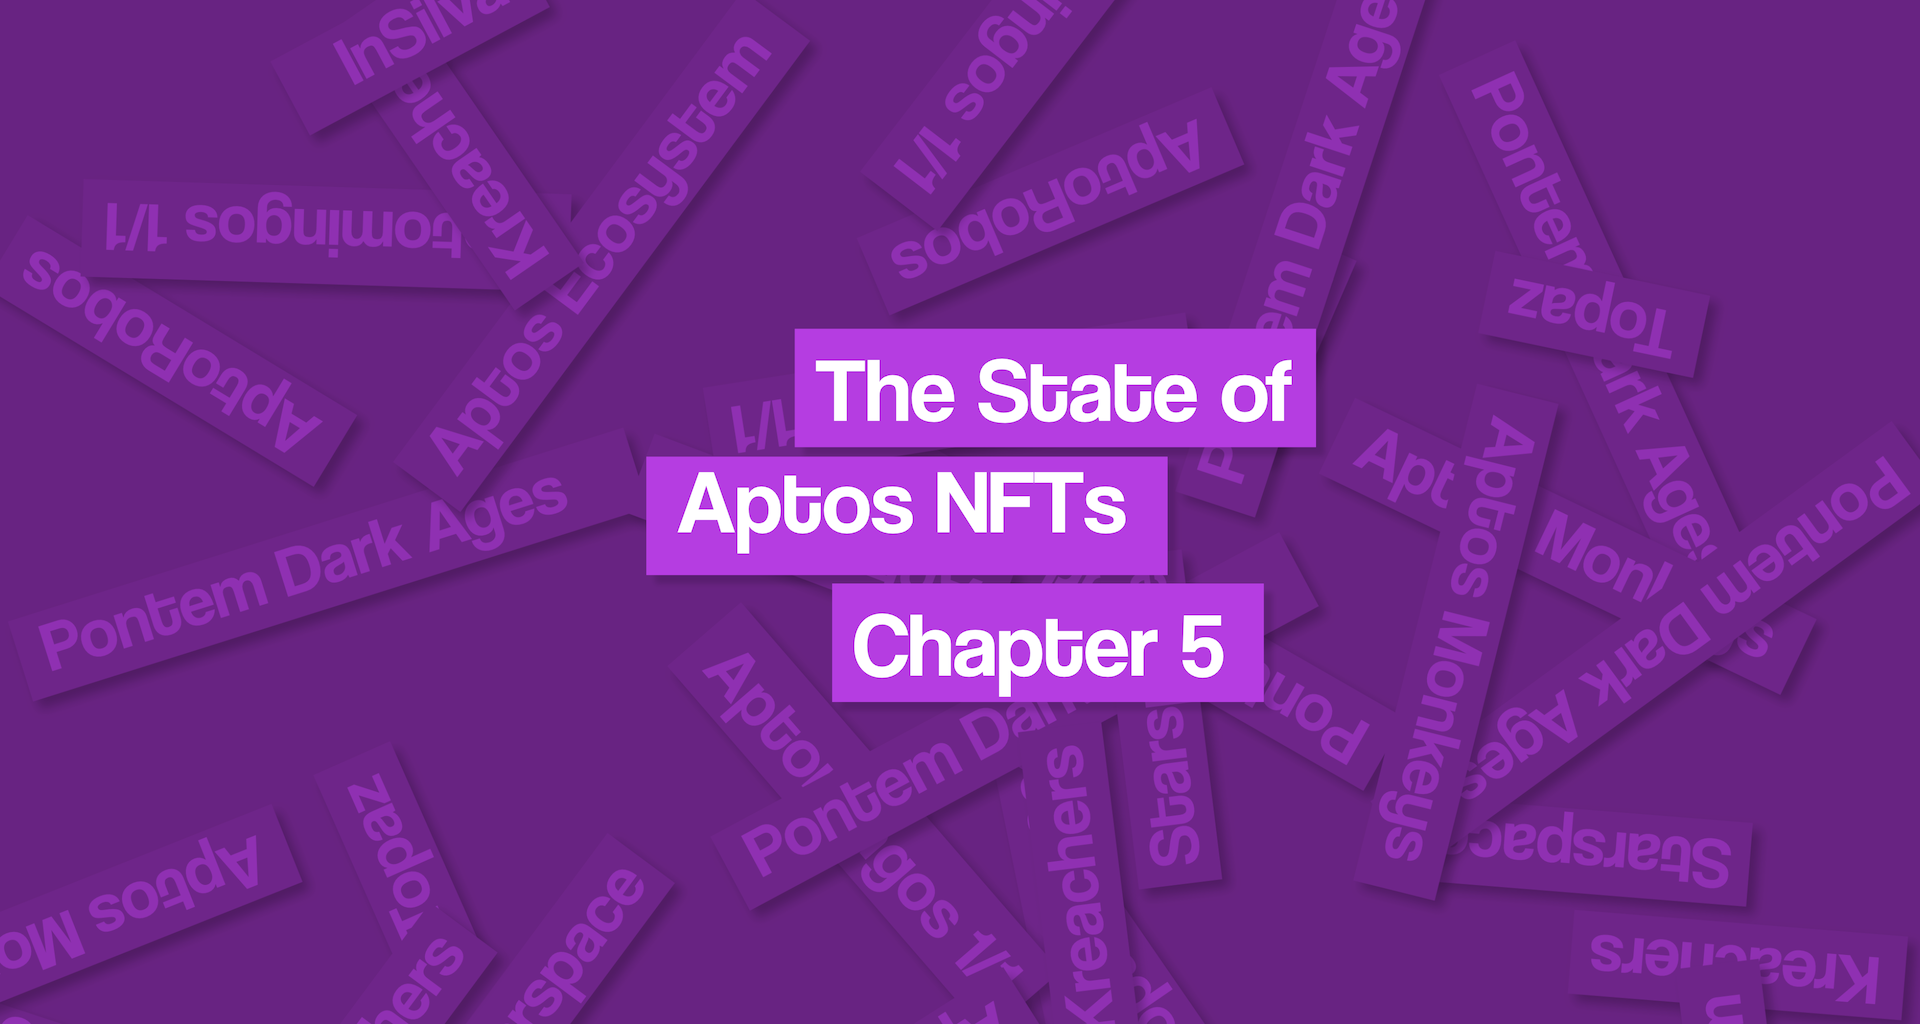 The State of Aptos NFTs Chapter 5